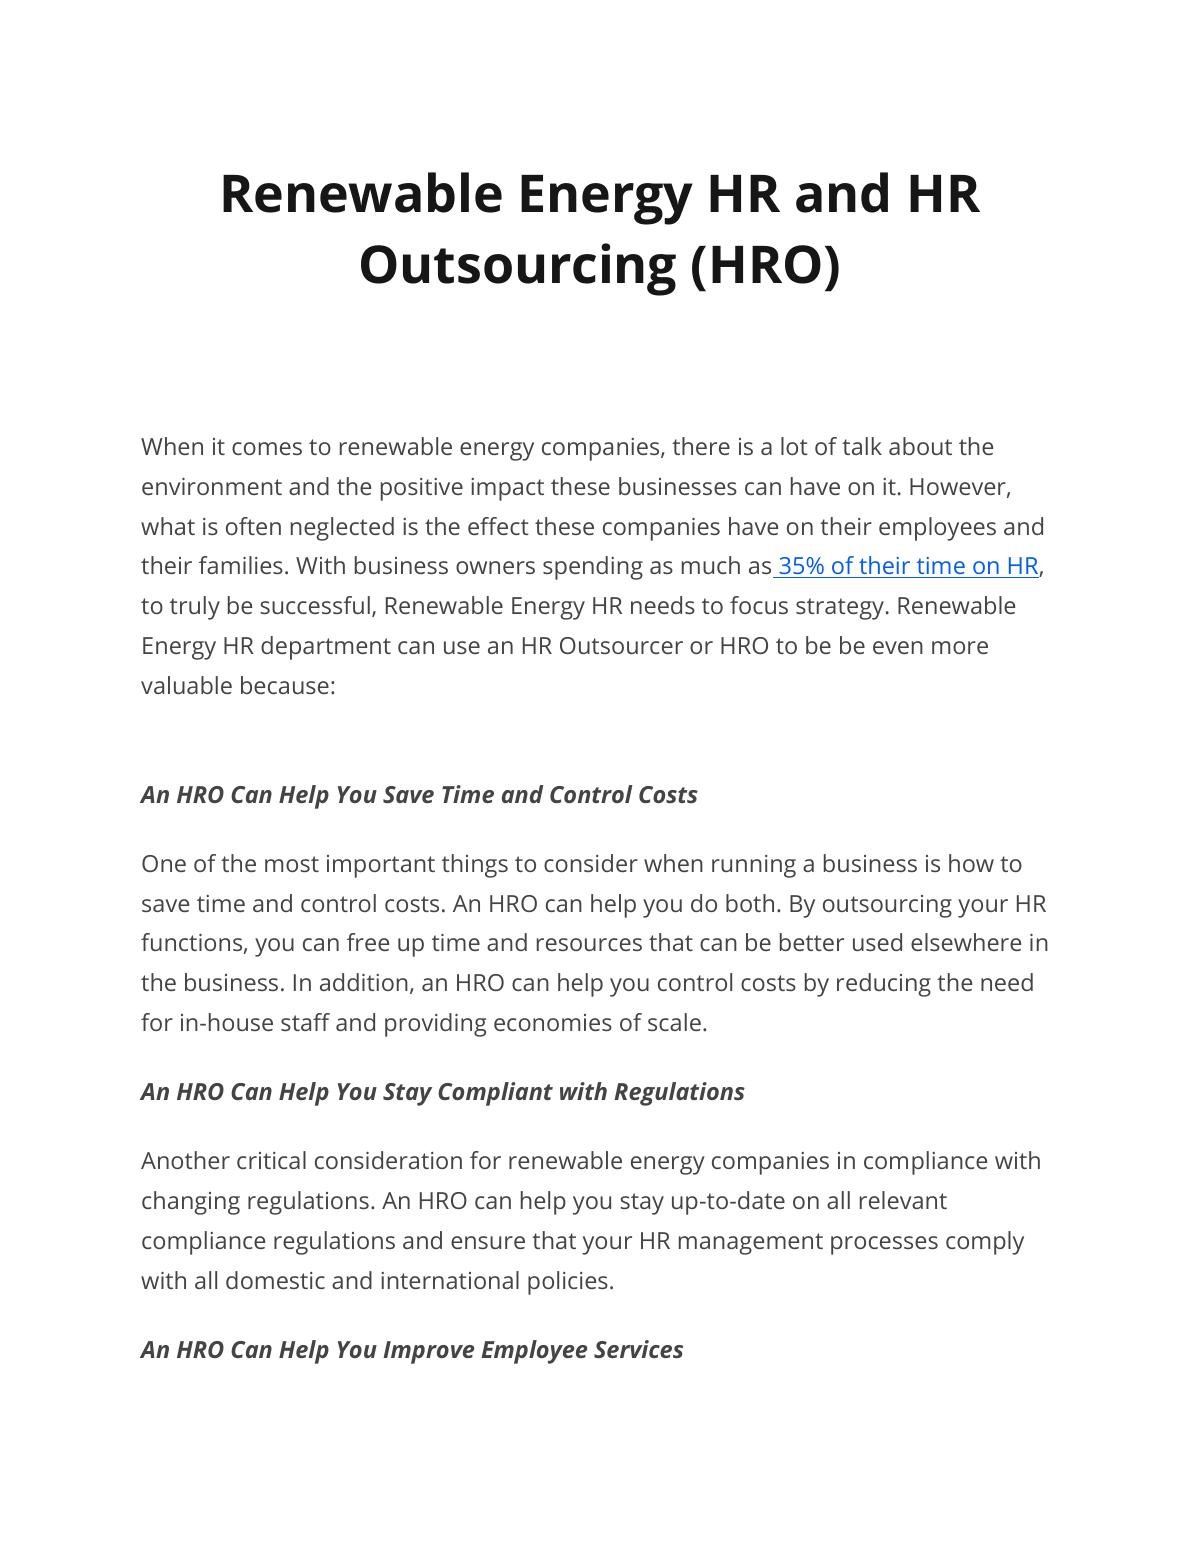 Renewable Energy HR and HR Outsourcing (HRO)